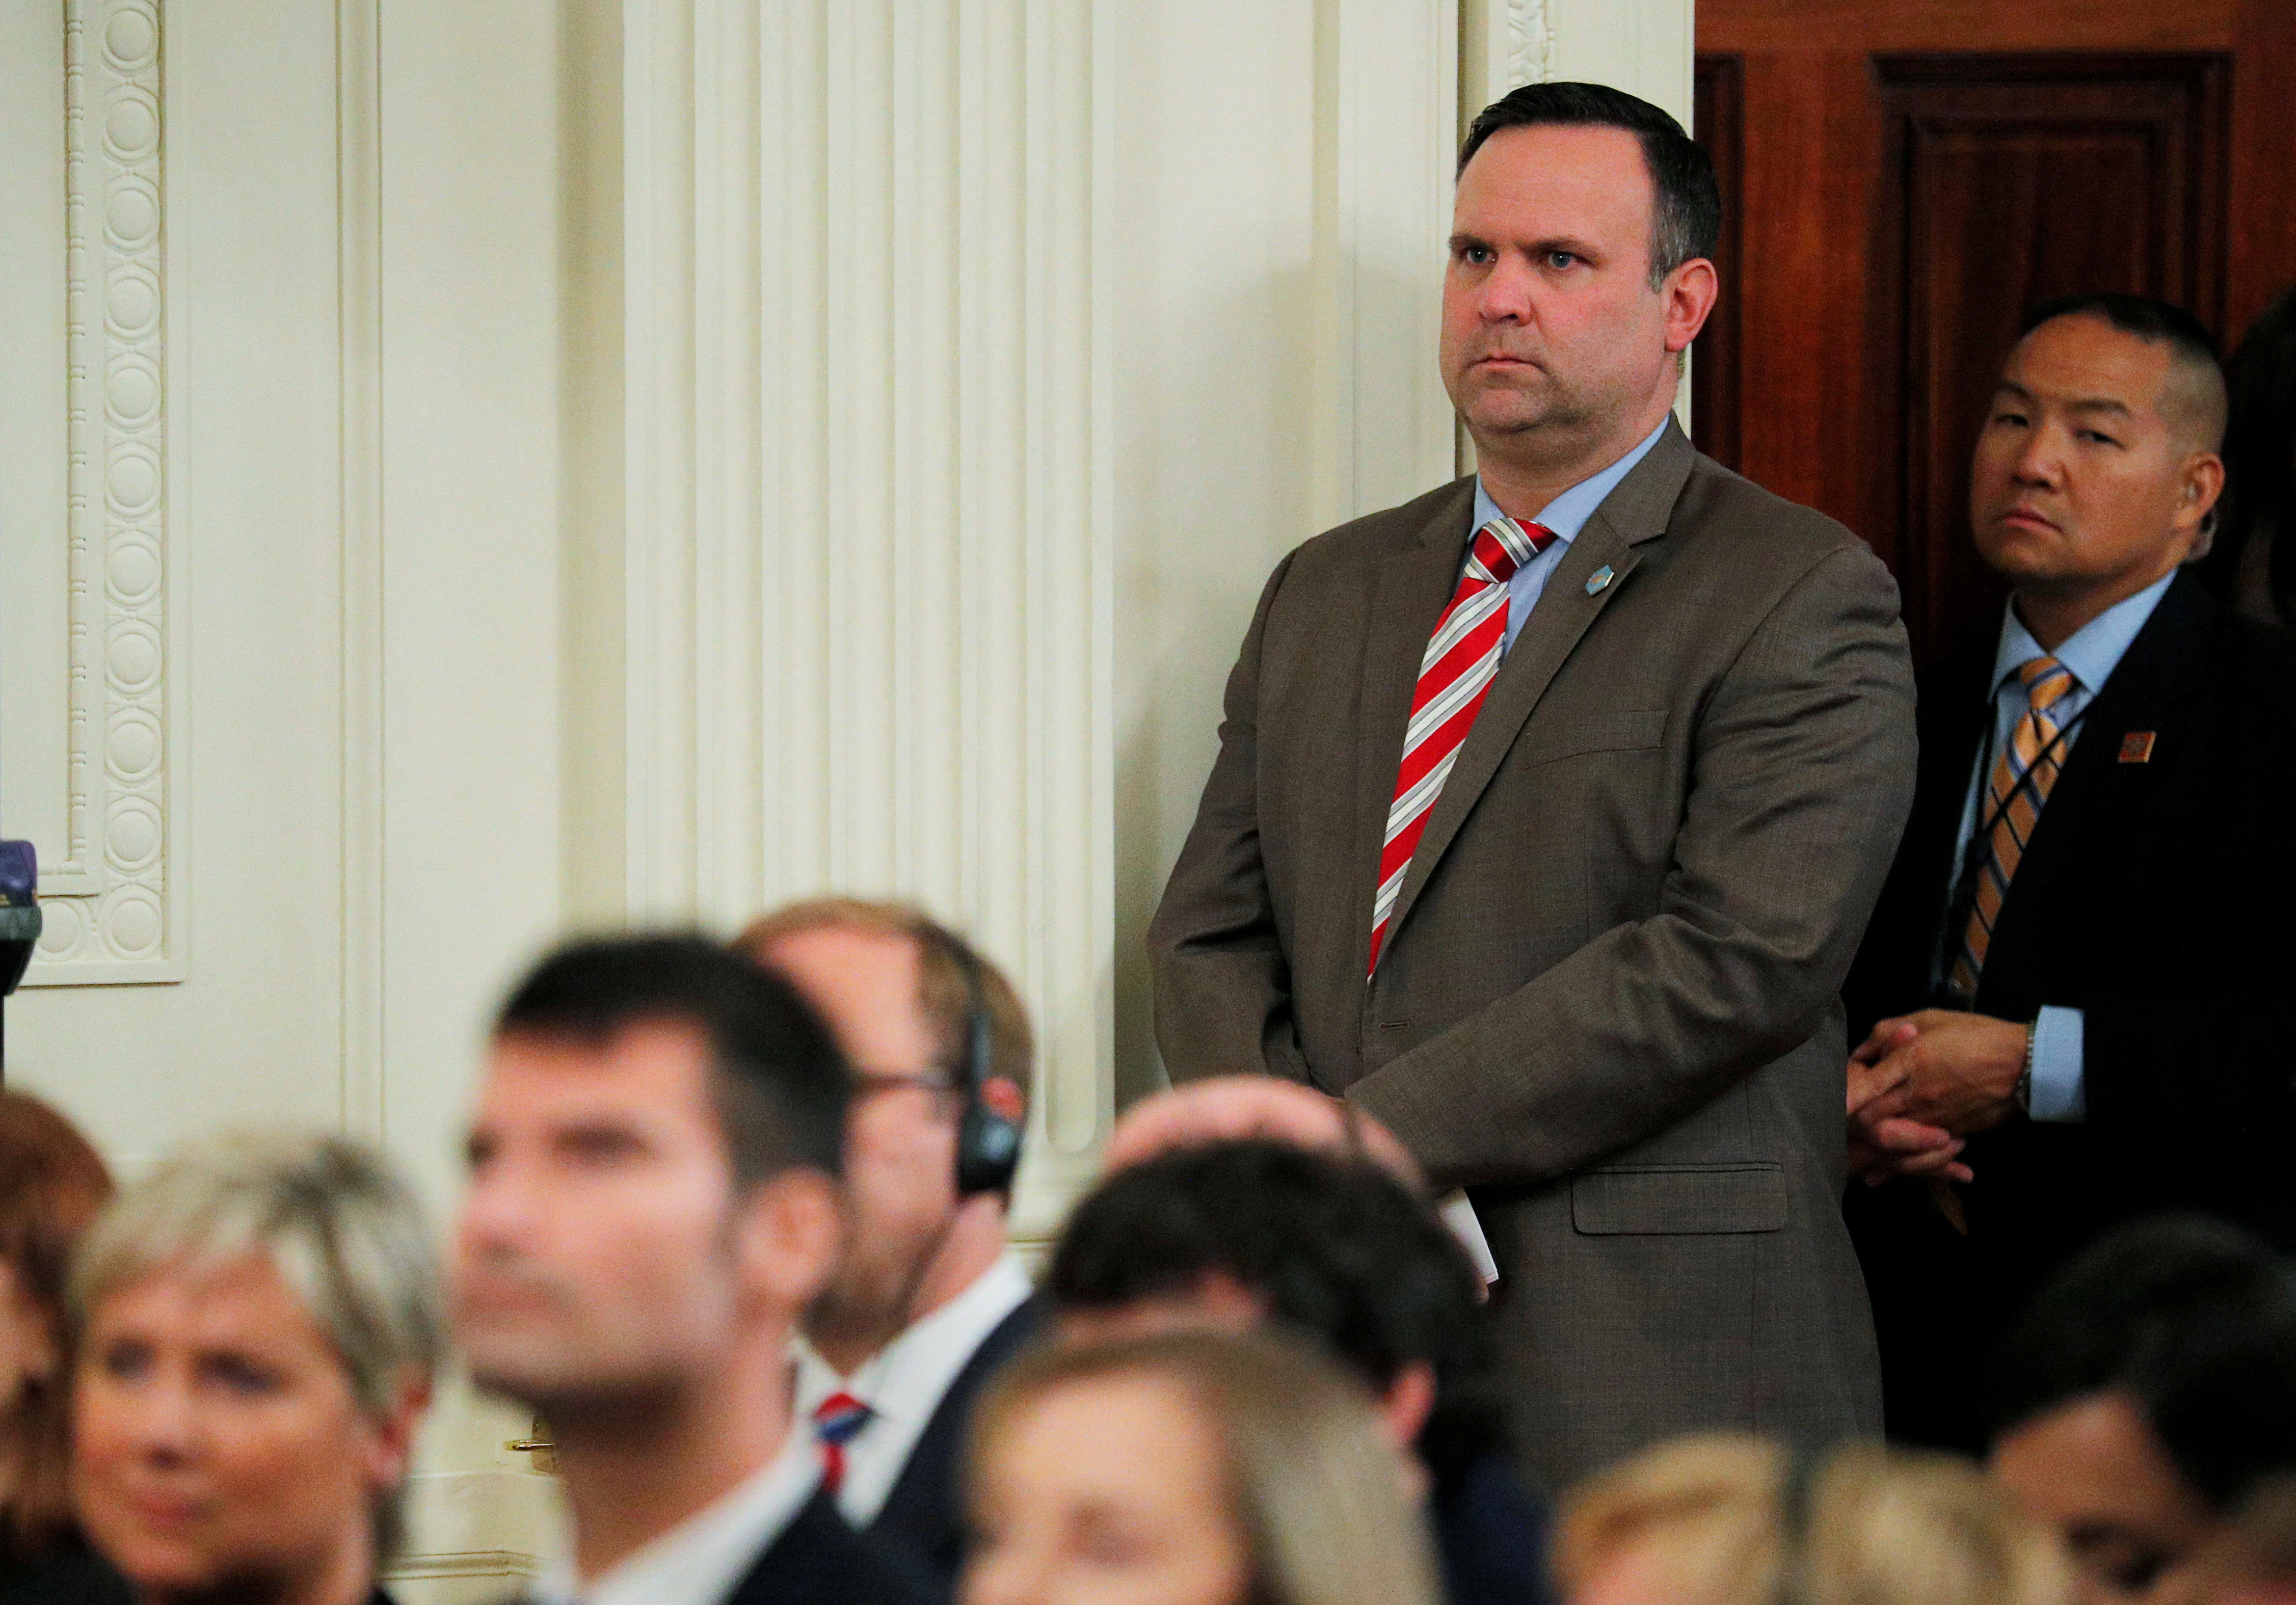 White House Social Media Director Scavino awaits start of joint news conference at the White House in Washington